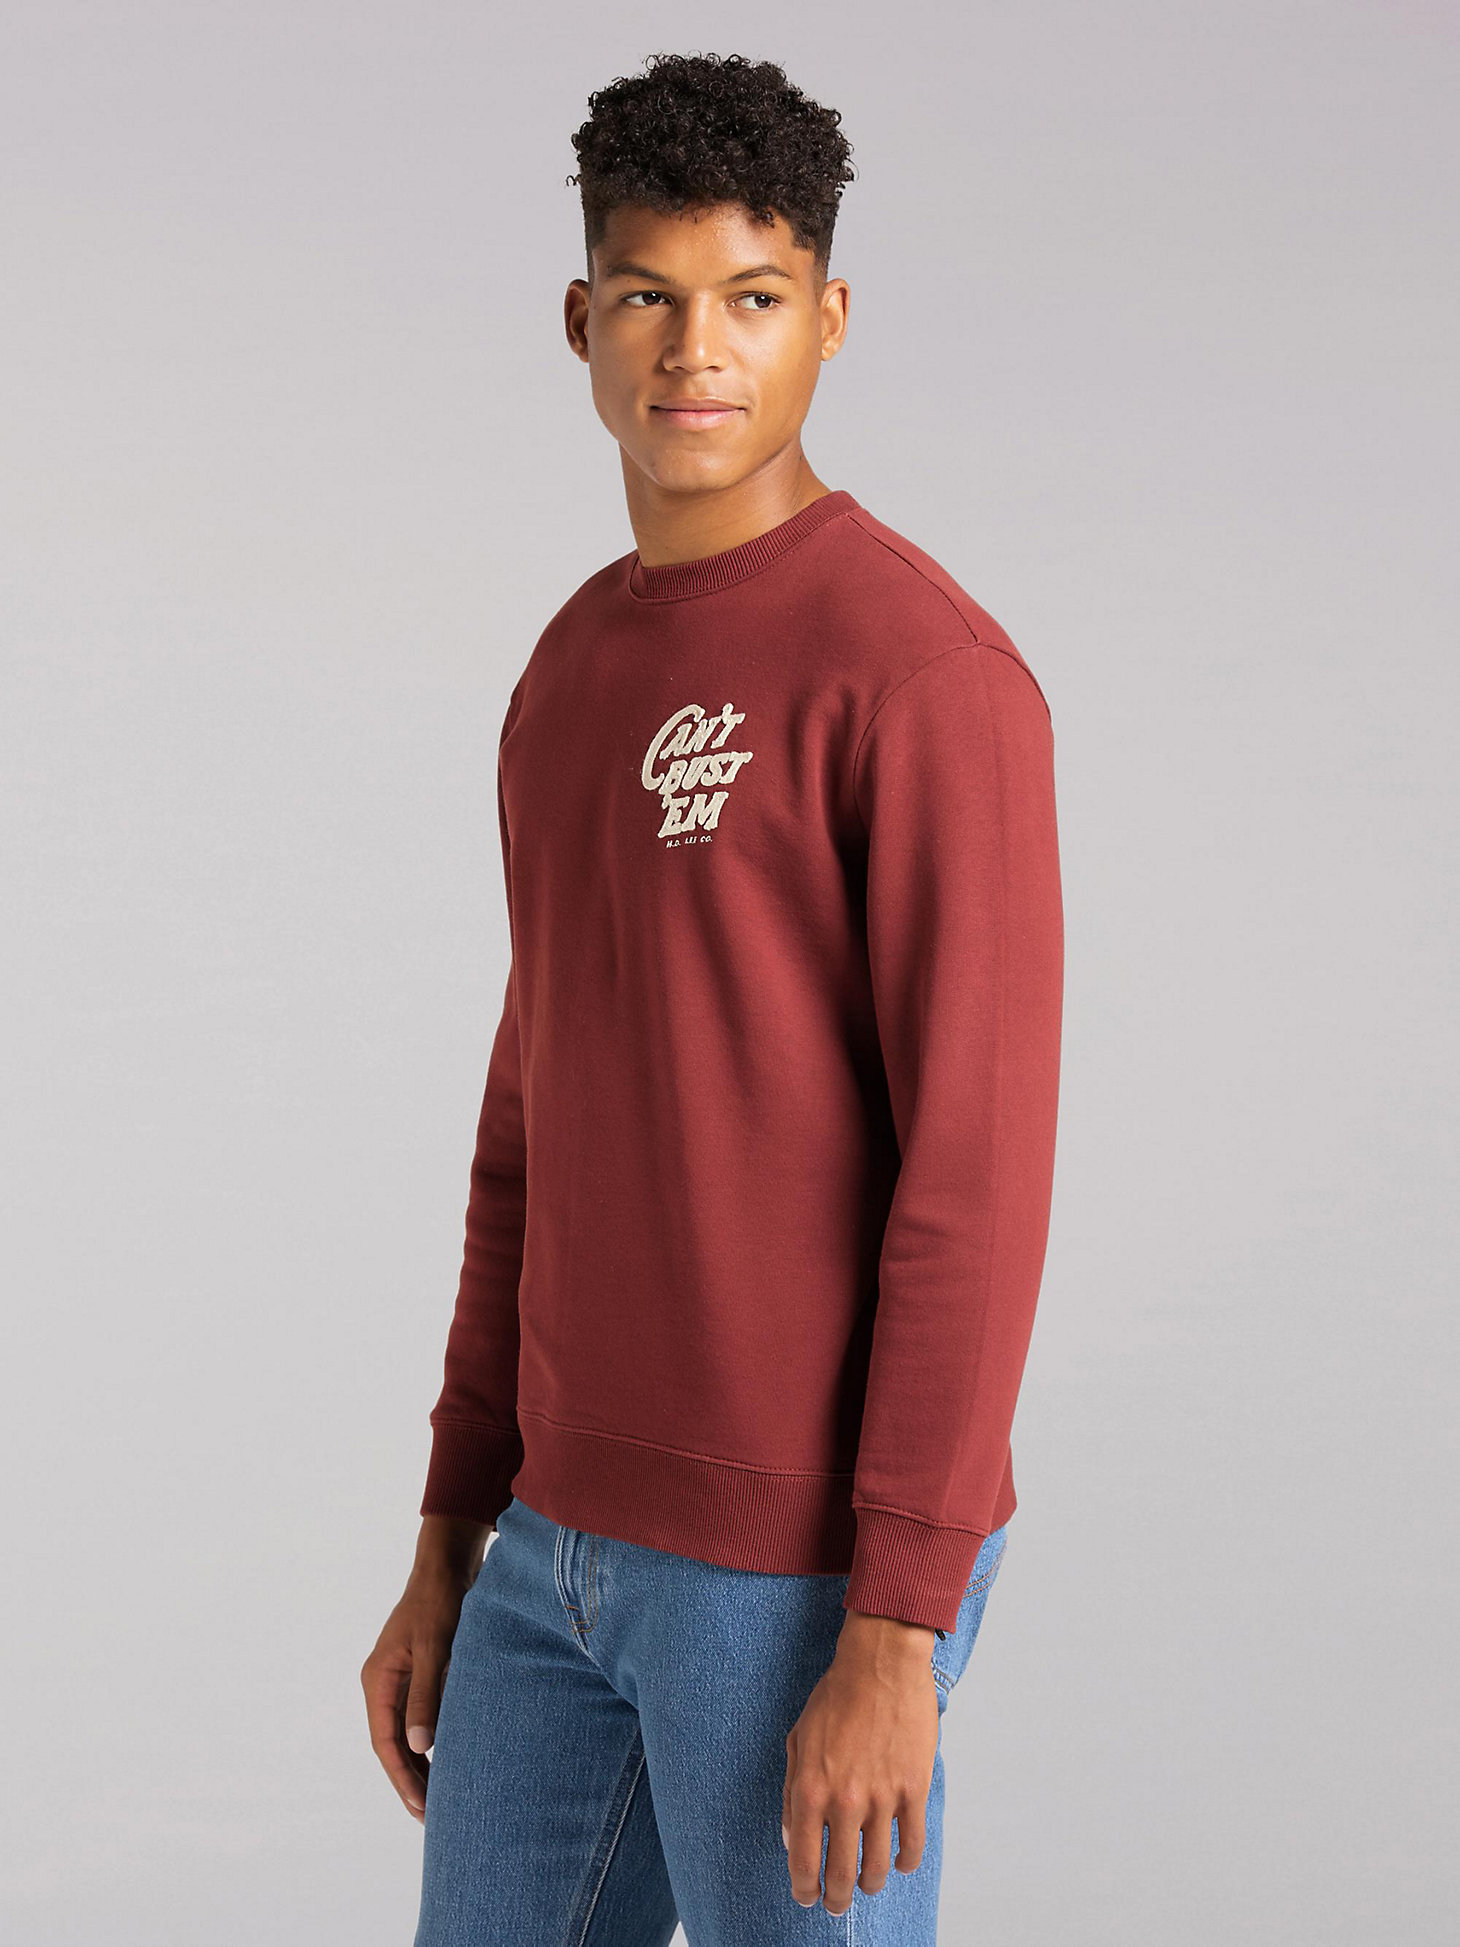 Men's Lee European Collection Can't Bust 'Em Rooster Sweatshirt in Fired Brick alternative view 2